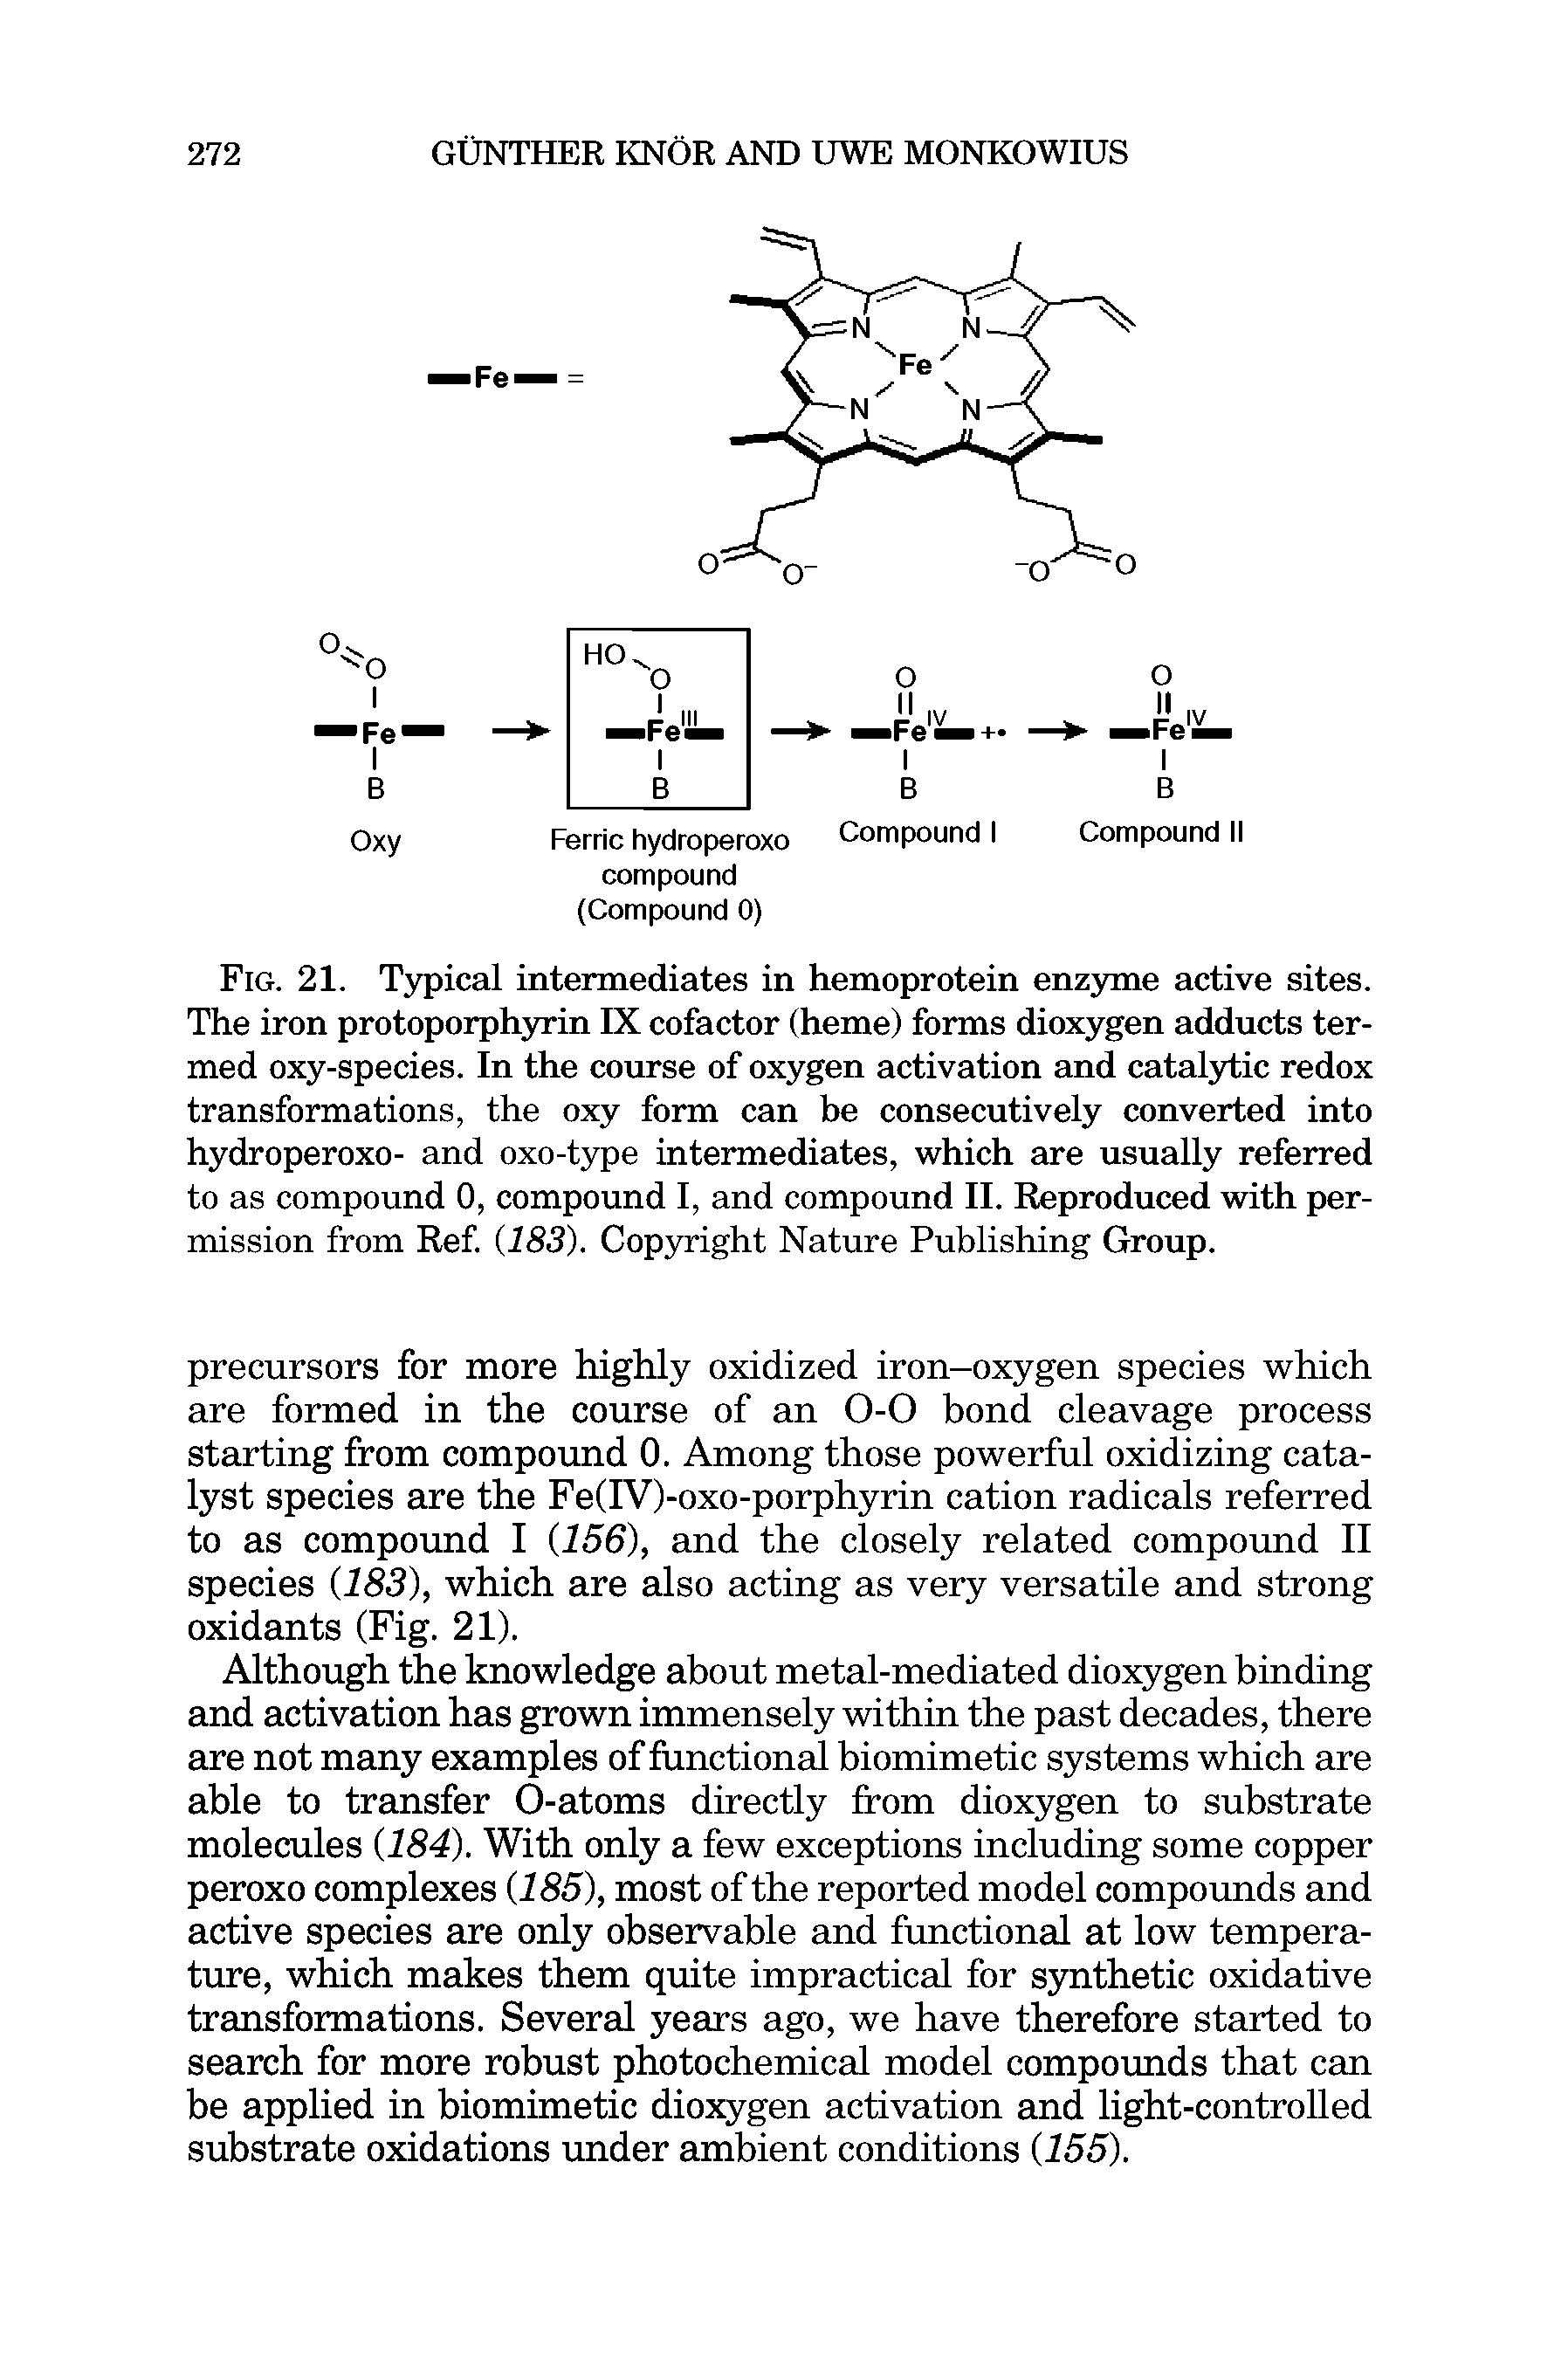 Fig. 21. Typical intermediates in hemoprotein enzyme active sites. The iron protoporphyrin IX cofactor (heme) forms dioxygen adducts termed oxy-species. In the course of oxygen activation and catalytic redox transformations, the oxy form can be consecutively converted into hydroperoxo- and oxo-type intermediates, which are usually referred to as compound 0, compound I, and compound II. Reproduced with permission from Ref (183). Copyright Nature Publishing Group.